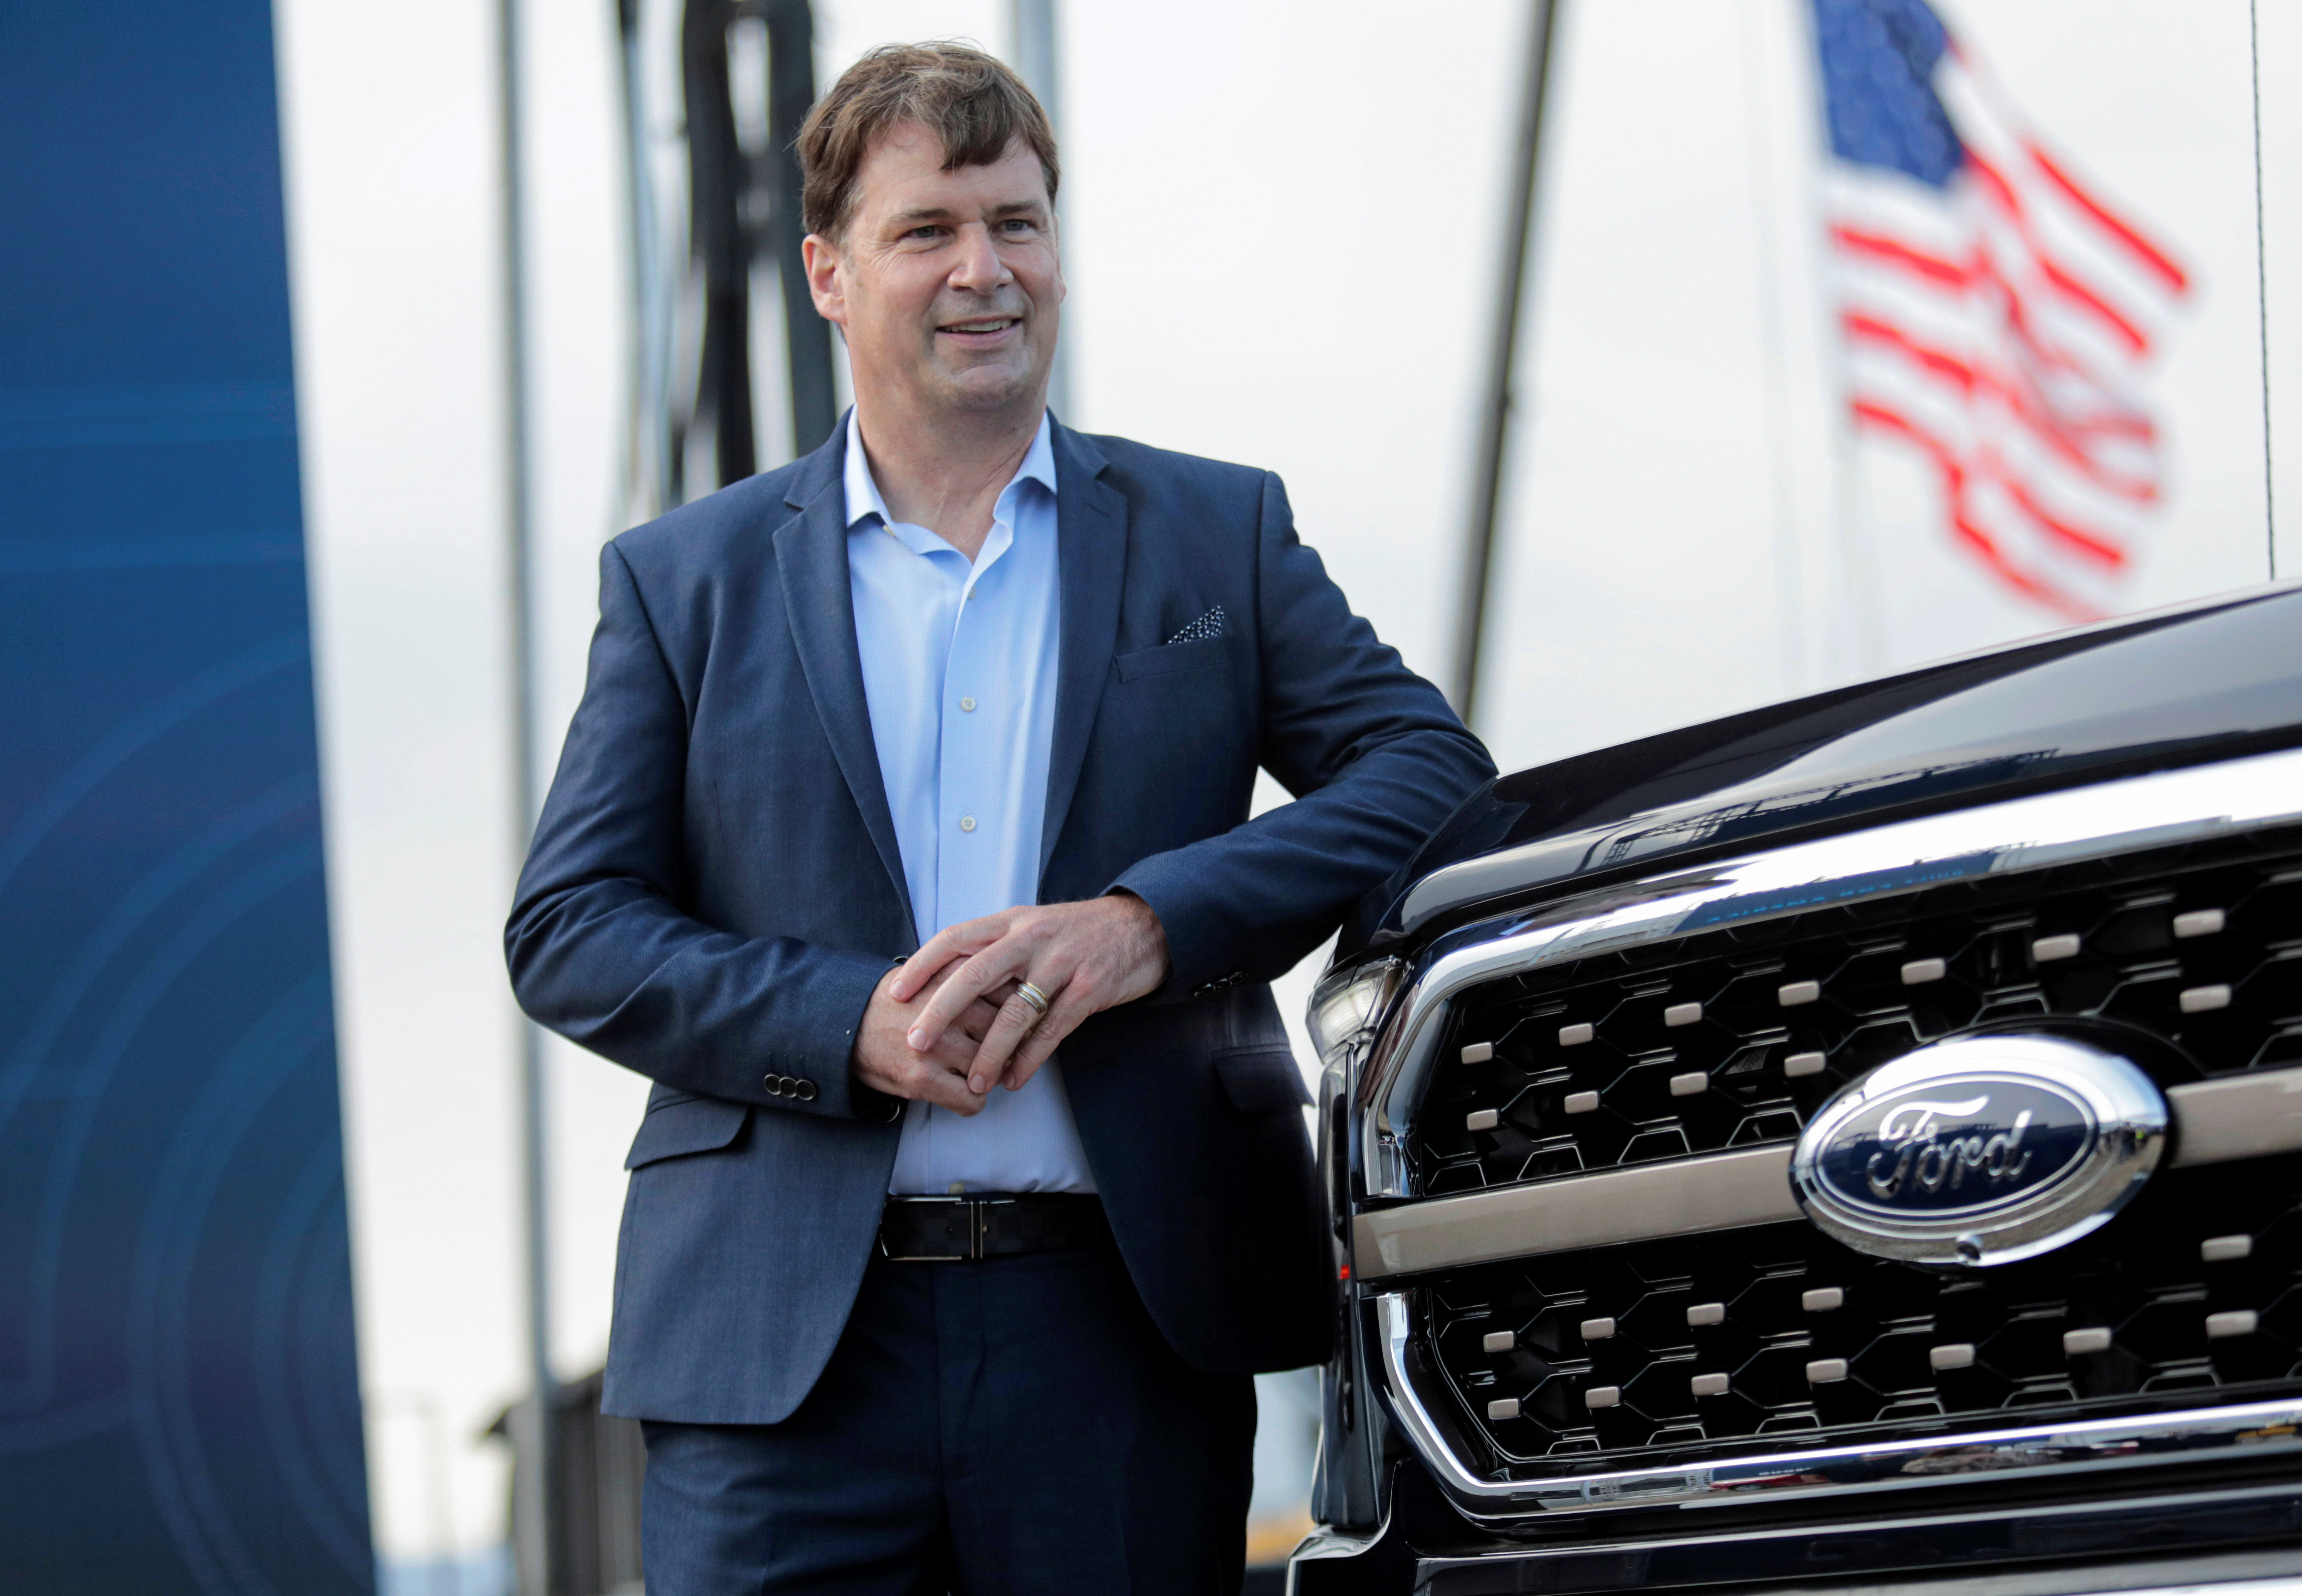 Ford Motor Co. CEO Jim Farley poses next to a new 2021 Ford F-150 pickup truck at the Rouge Complex in Dearborn,Michigan